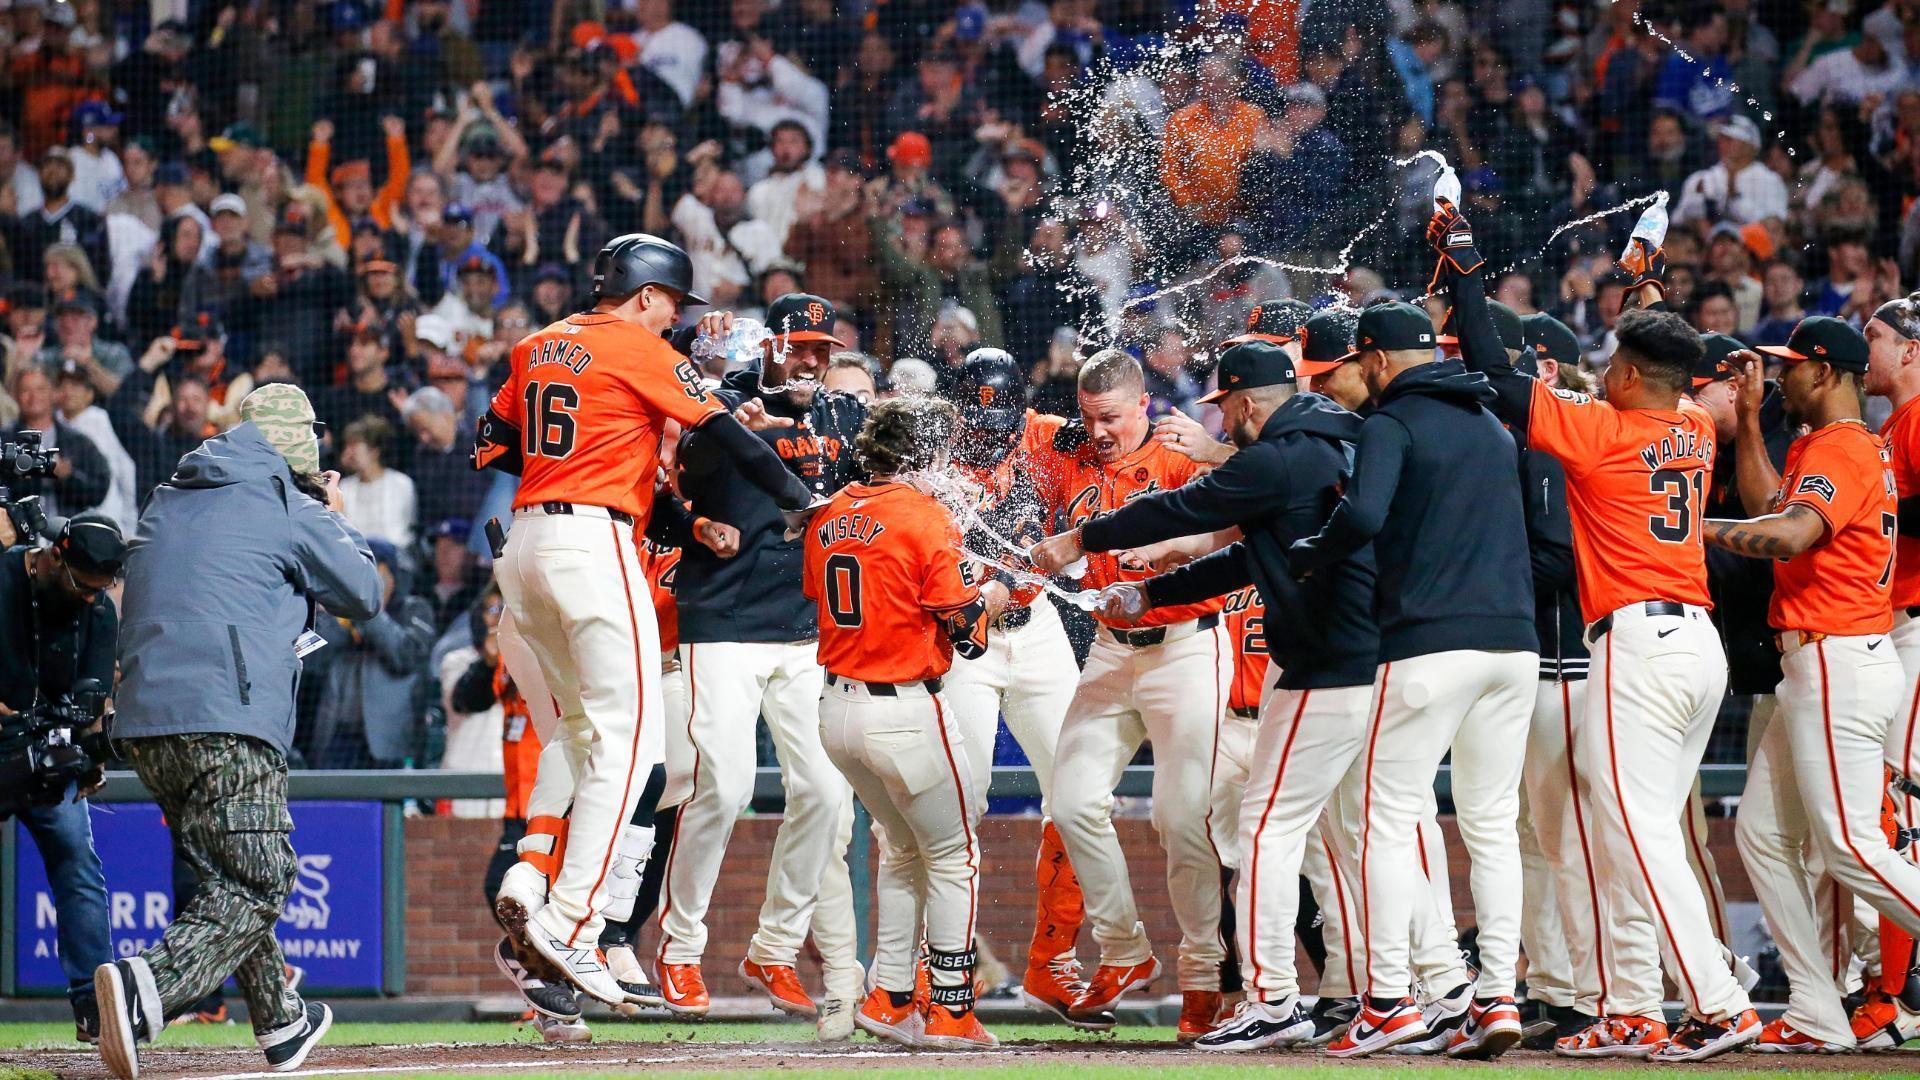 Brett Wisely hits 2-run homer in 9th to send Giants past Dodgers  5-3